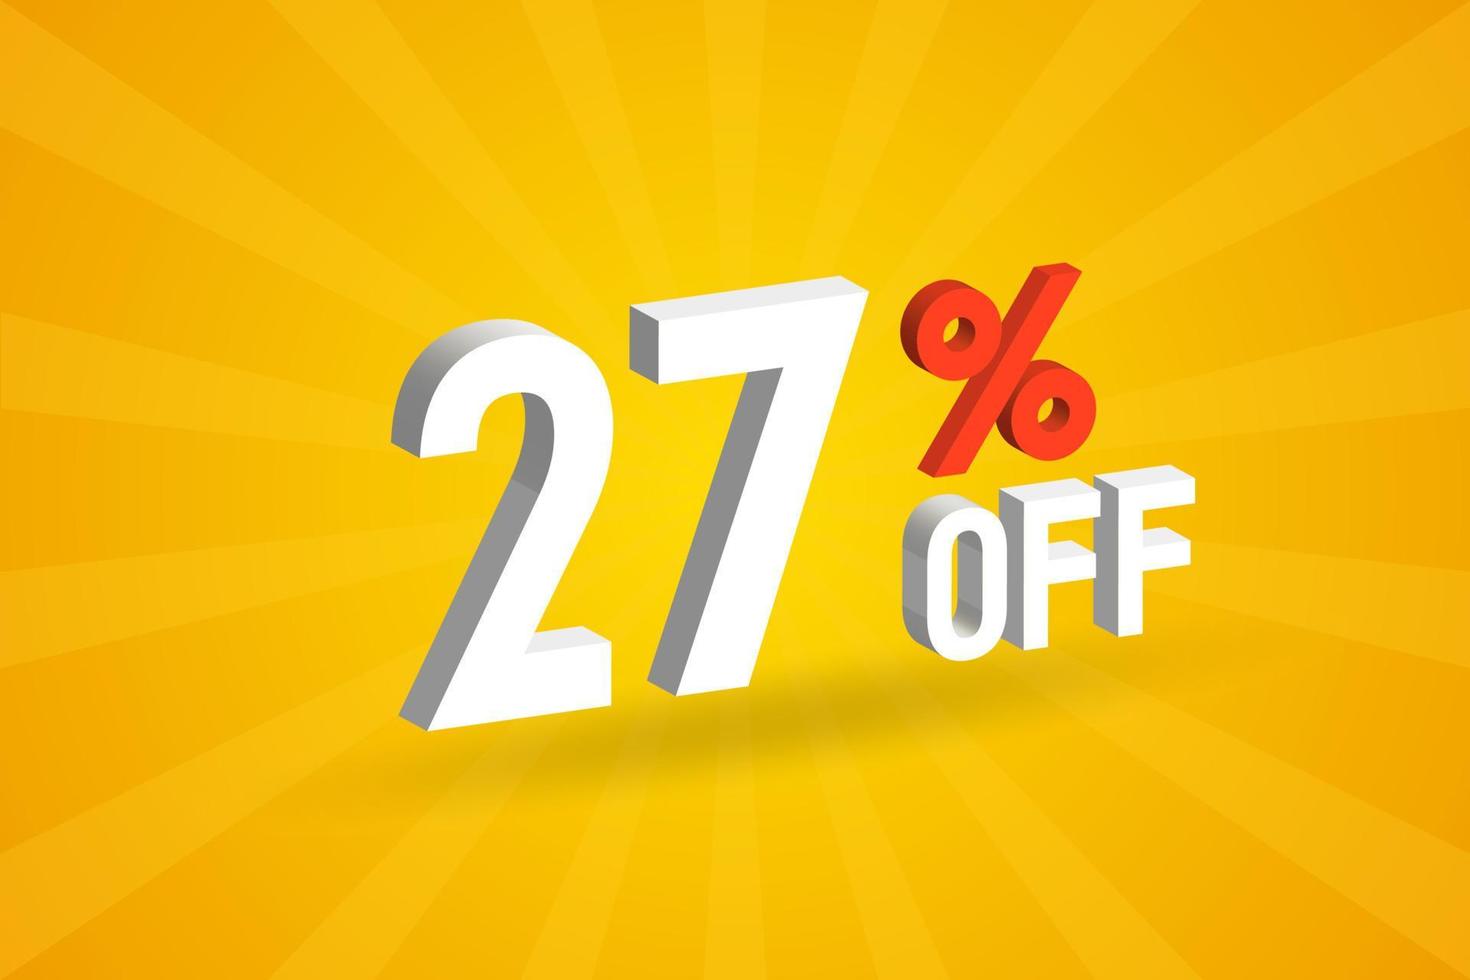 27 Percent off 3D Special promotional campaign design. 27 off 3D Discount Offer for Sale and marketing. vector